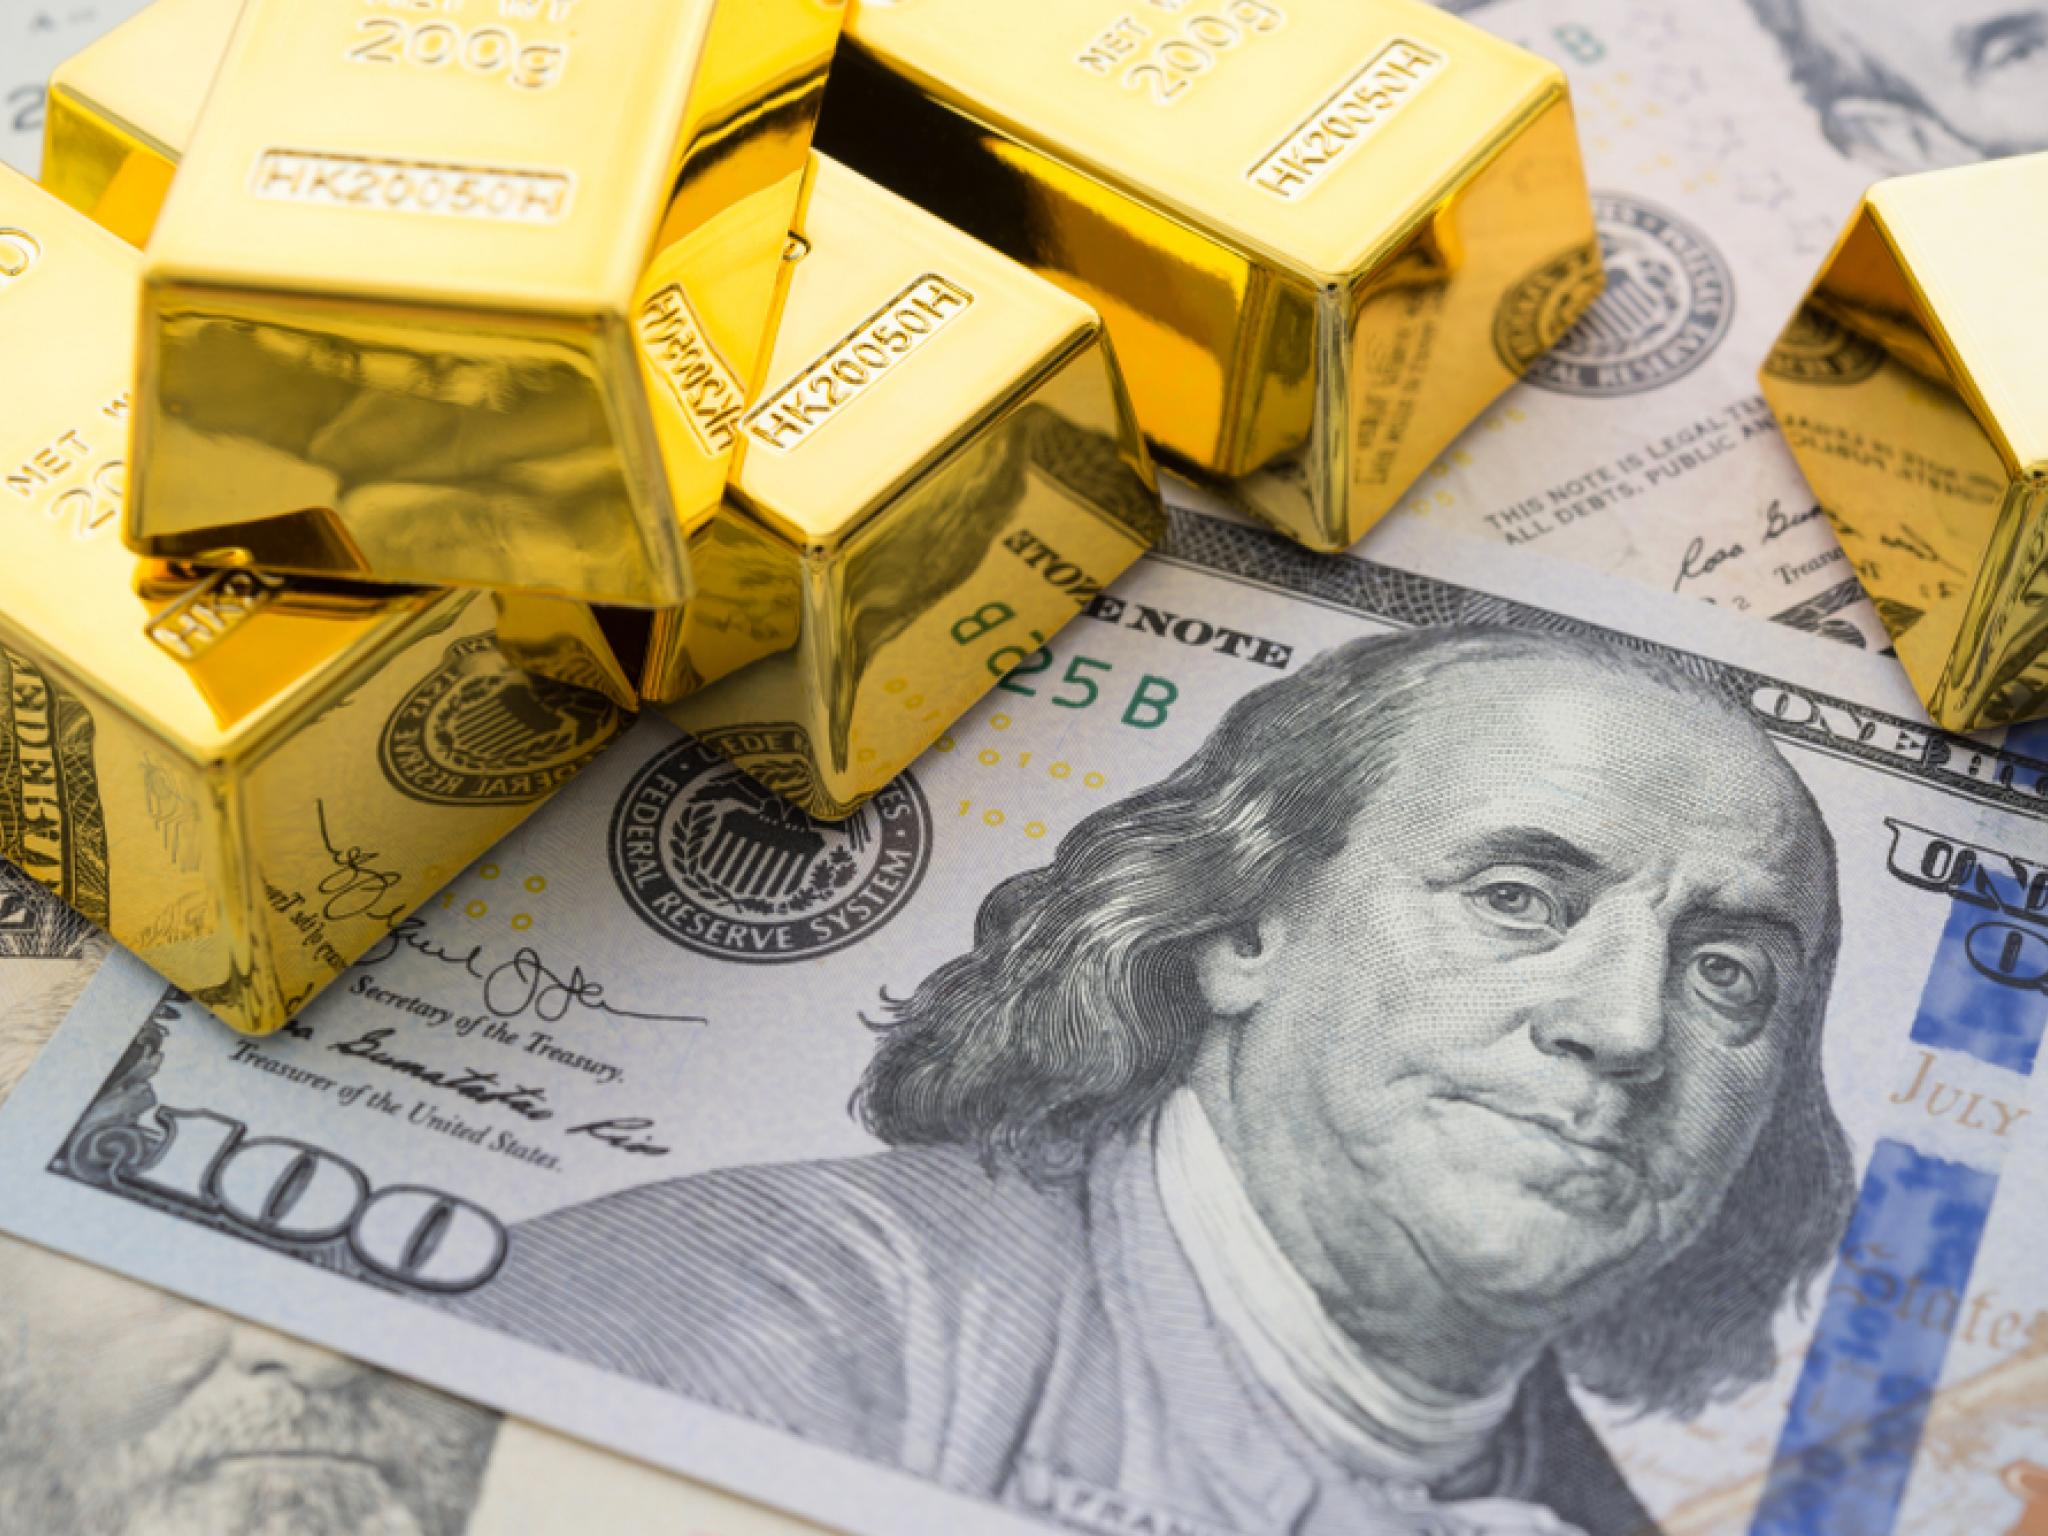  peter-schiff-on-why-gold-fell-wednesday-persistent-inflation-is-actually-very-bullish-for-bullion 